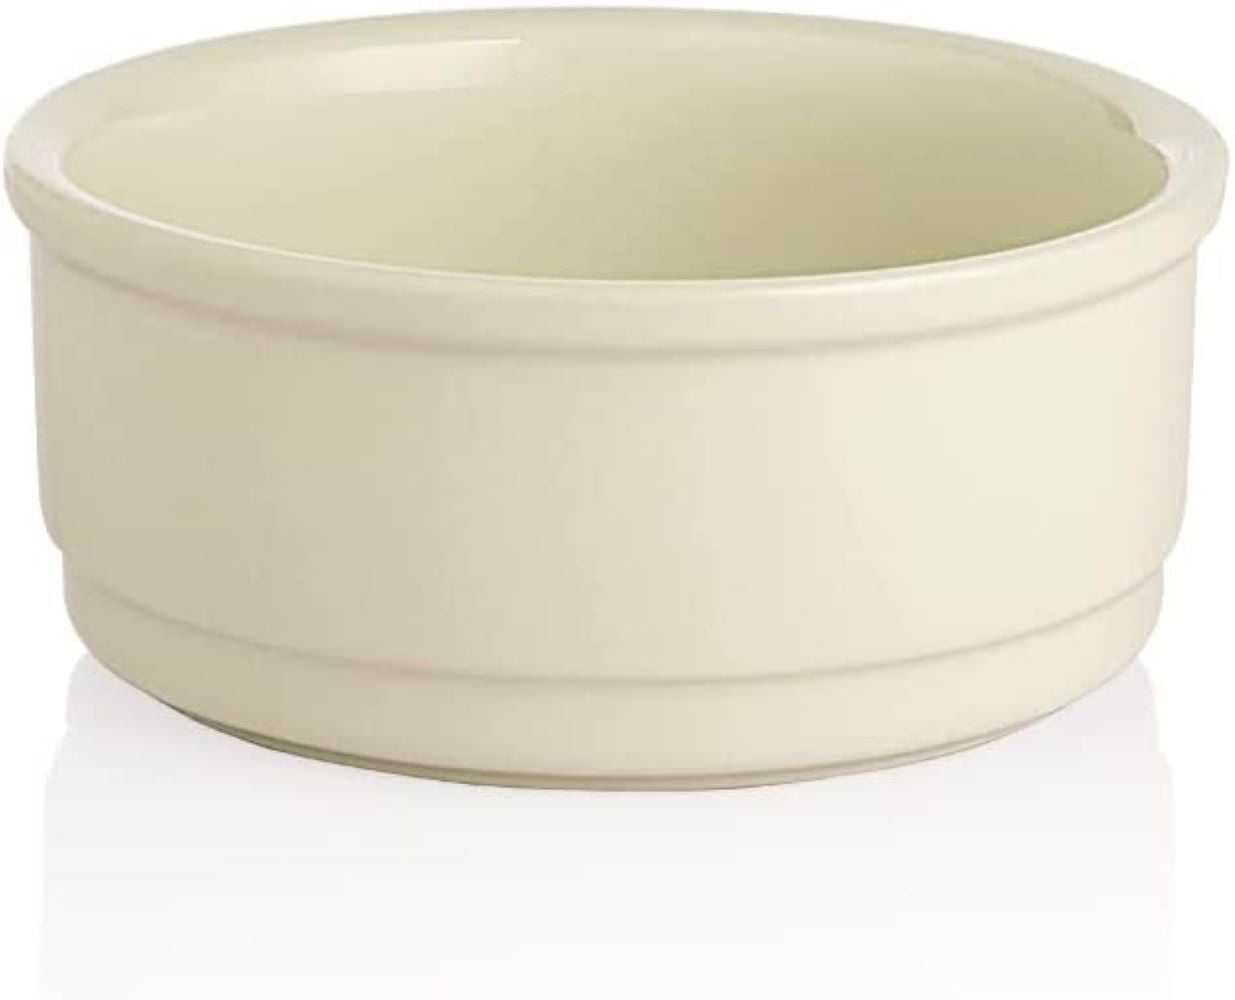 SWEEJAR Ceramic Dog Bowls, Dog Food Dish for Small Dogs and Cat